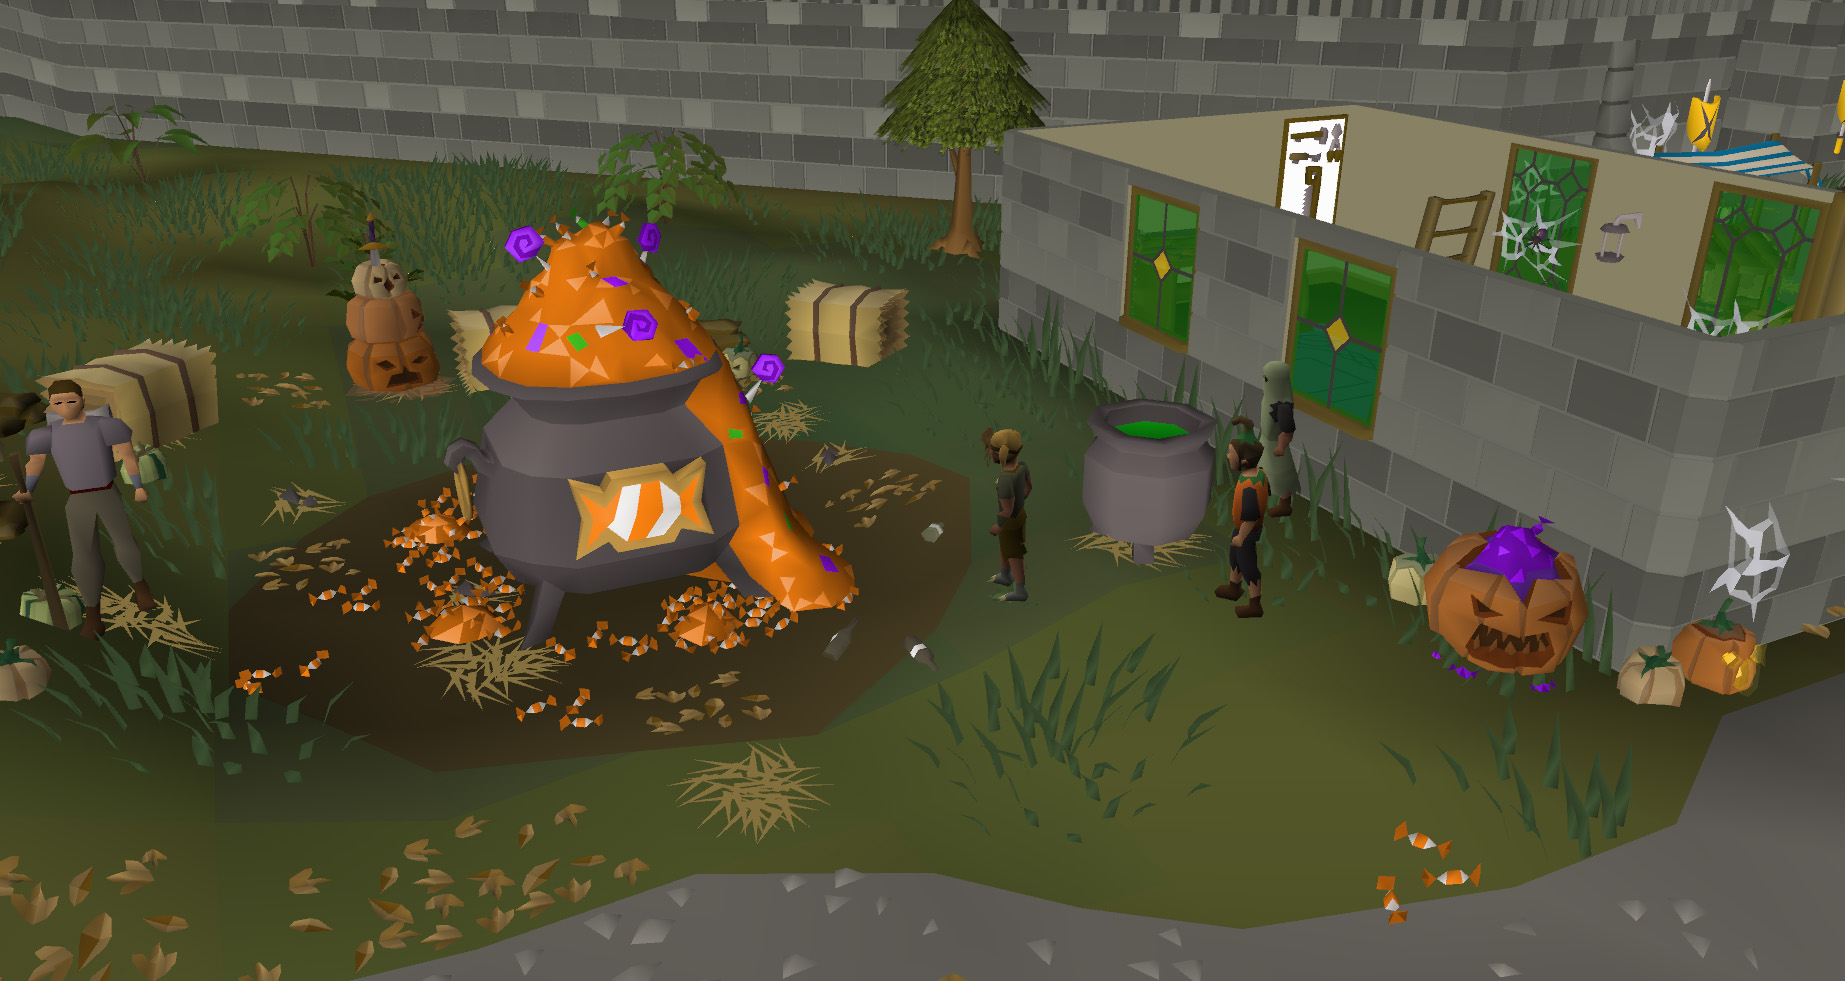 My Suggestion for the Halloween Event 2023: Deathcon III : r/runescape